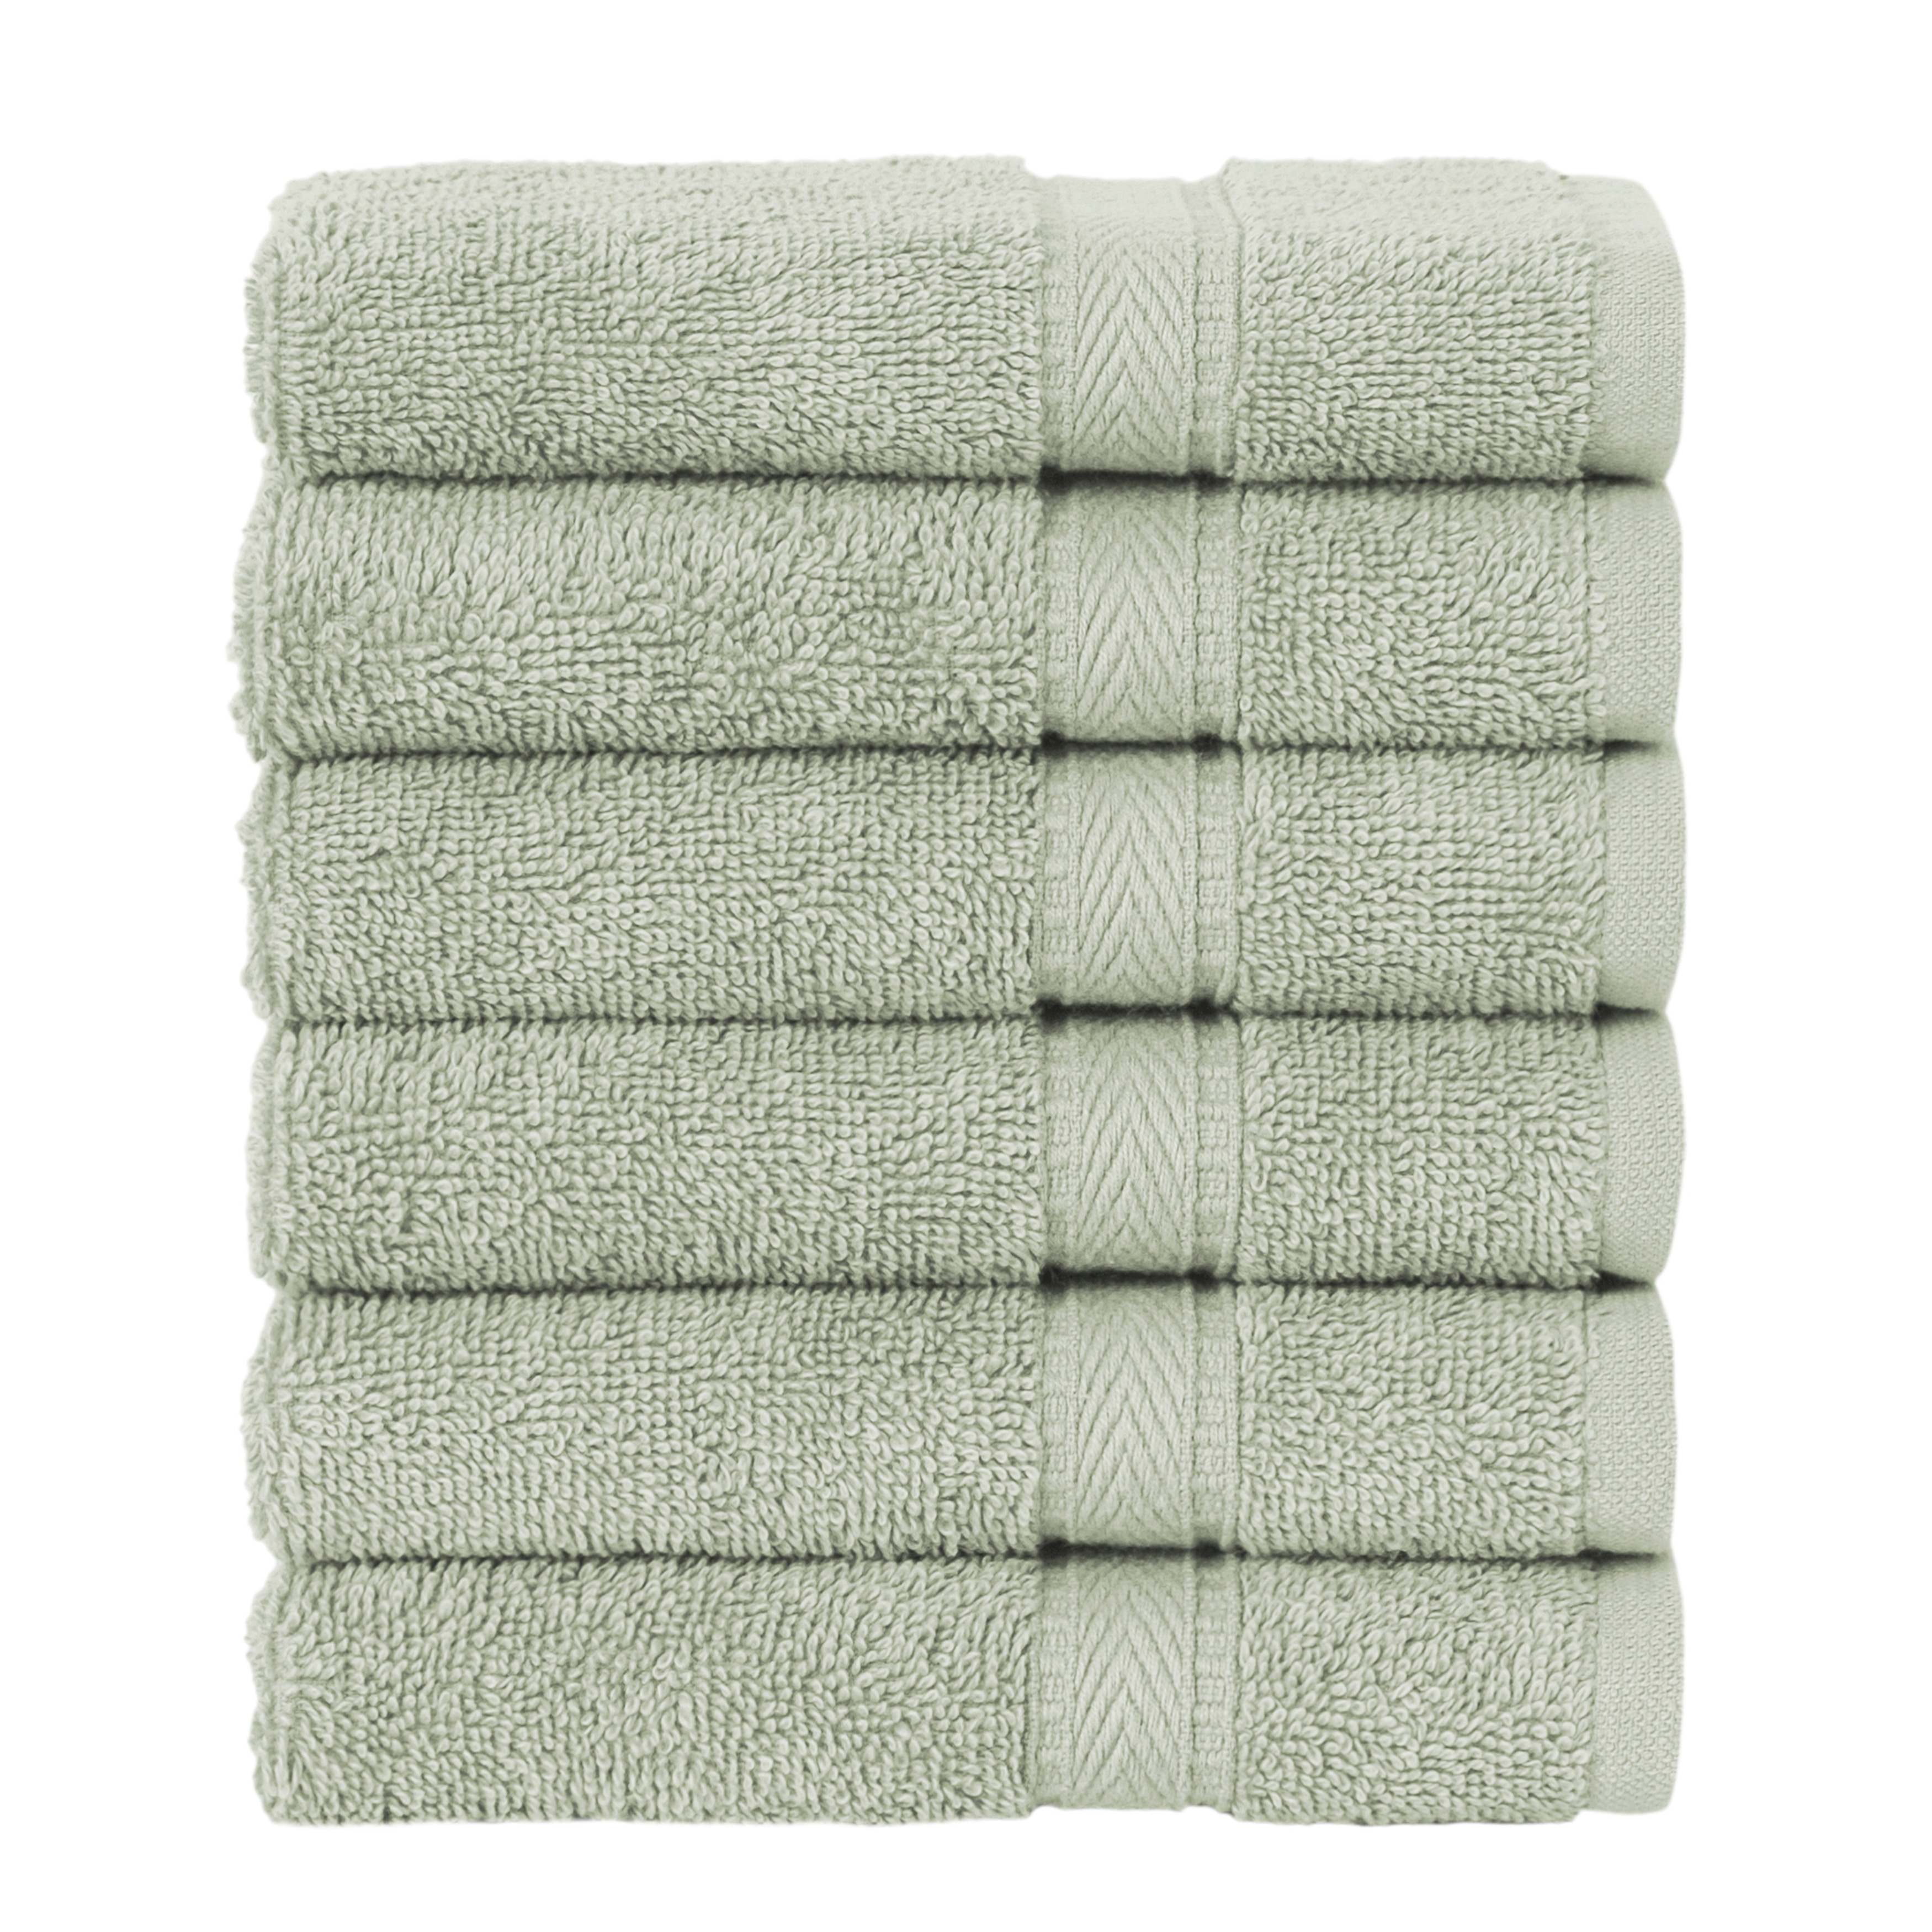 Authentic Hotel and Spa Omni Turkish Cotton Terry Washcloths (Set of 6) -  On Sale - Bed Bath & Beyond - 11090783